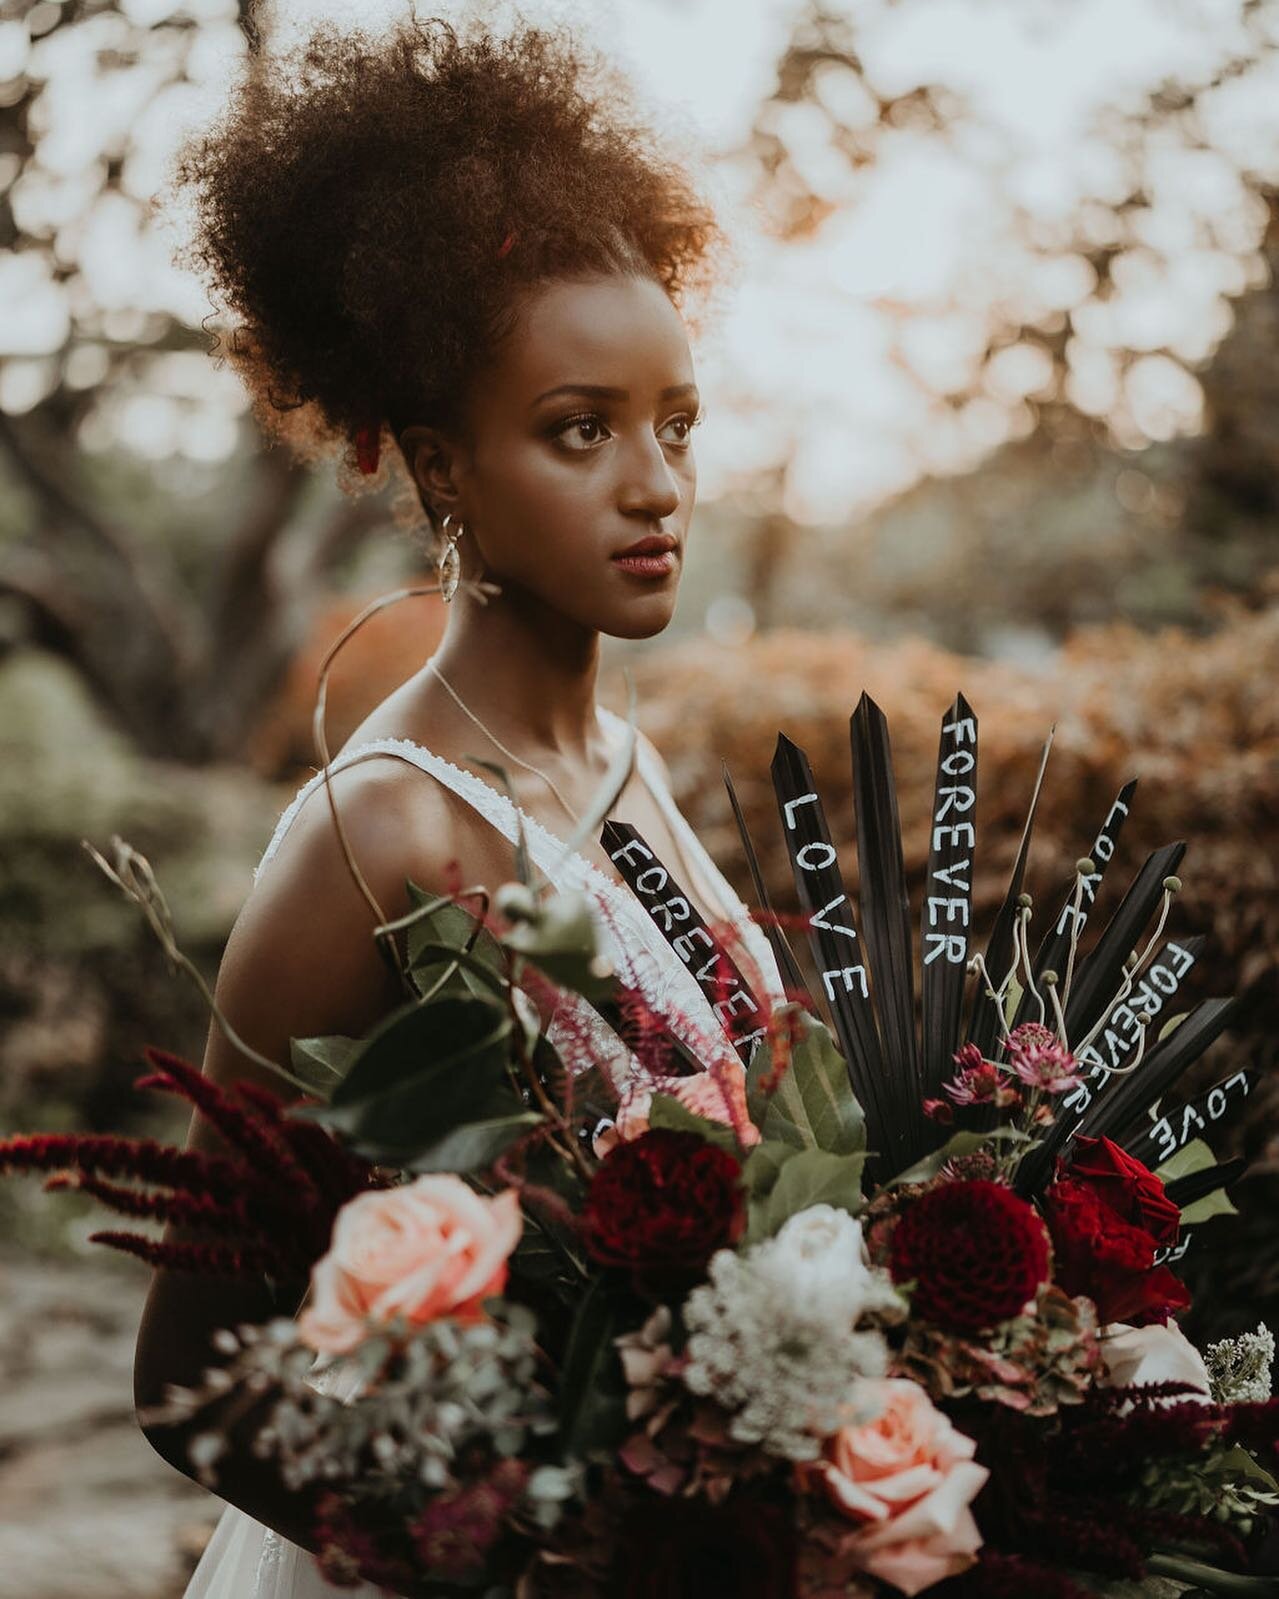 The florals for this shoot were absolutely incredible! Bespoke blows us away, as always.
.
Vendor love:
Makeup: Alexa Rae for @artistrybyalexa
.
Planning and decor: @idreamindecor
Photography: @rivkah_foto
Floral design: @bespokeblossoms
Venue: @abkh